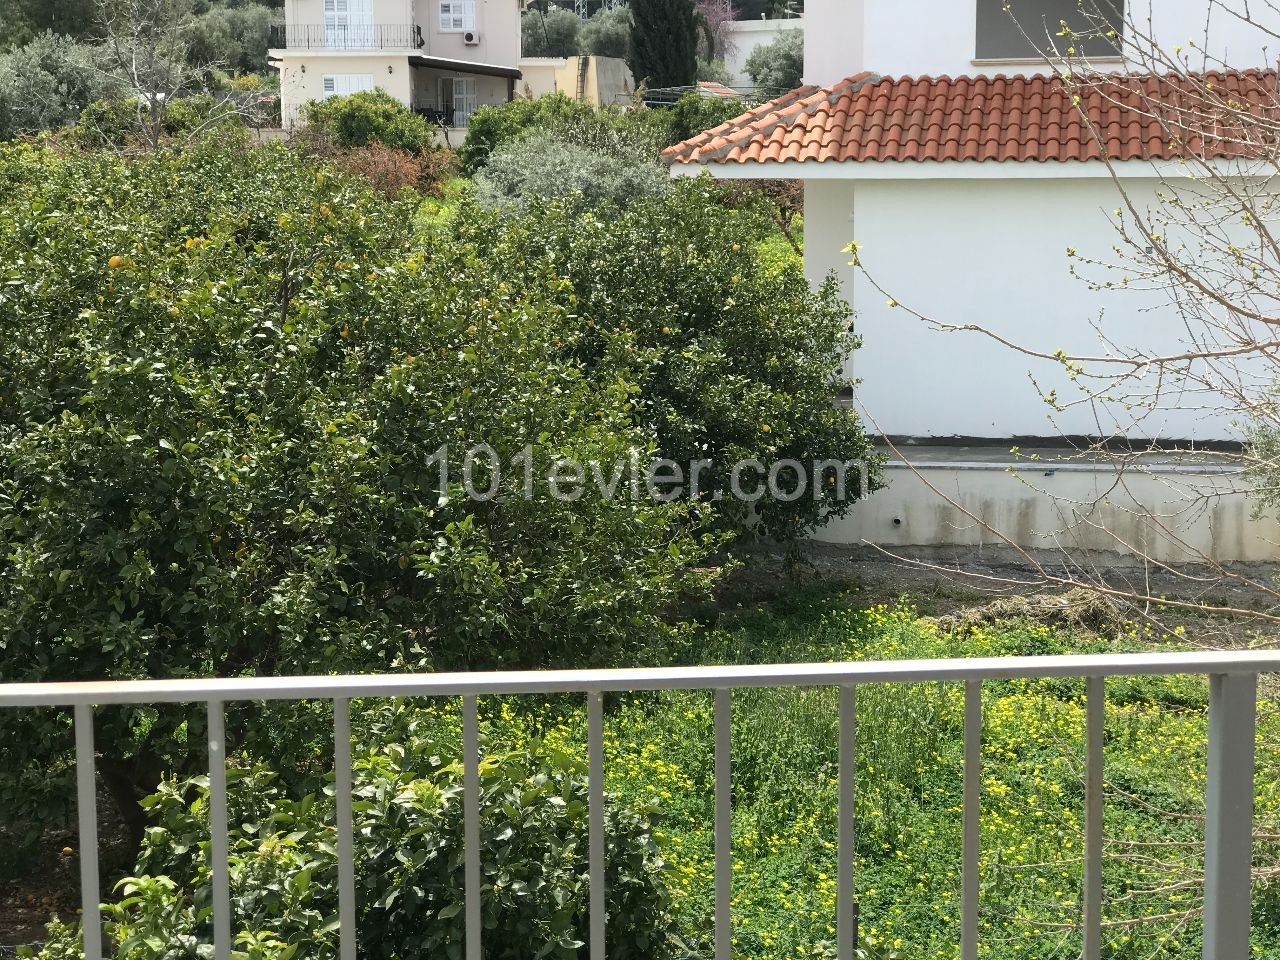 1st floor flat with terrace is for rent in a 7x24 secure site in Alsancak, Girne.05338403555 ** 